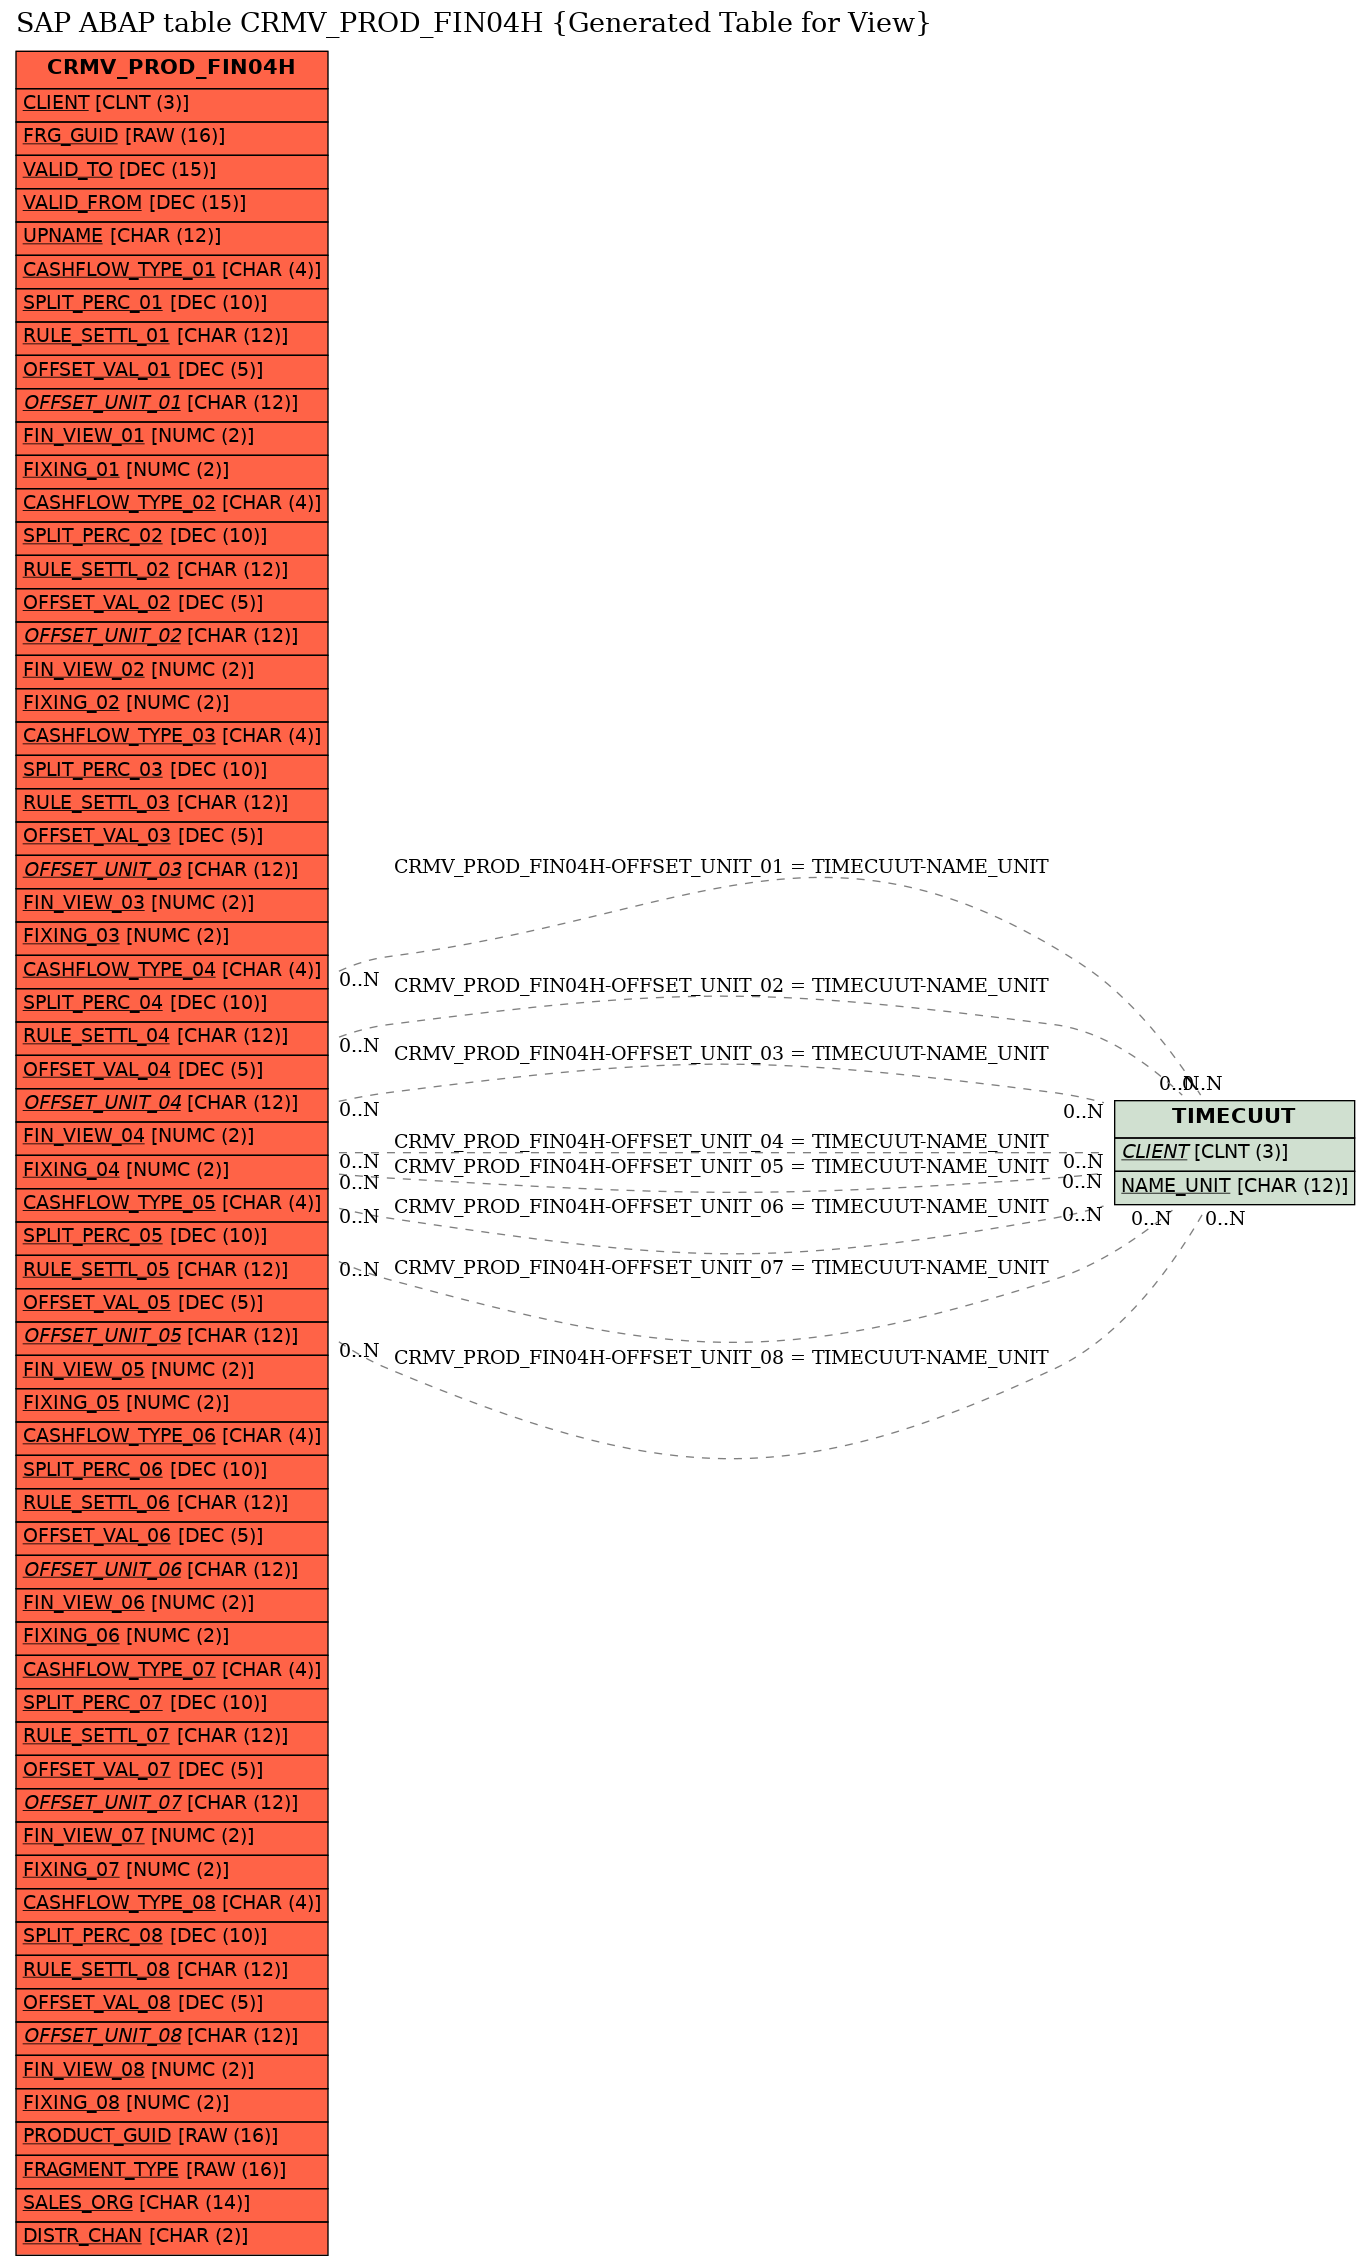 E-R Diagram for table CRMV_PROD_FIN04H (Generated Table for View)